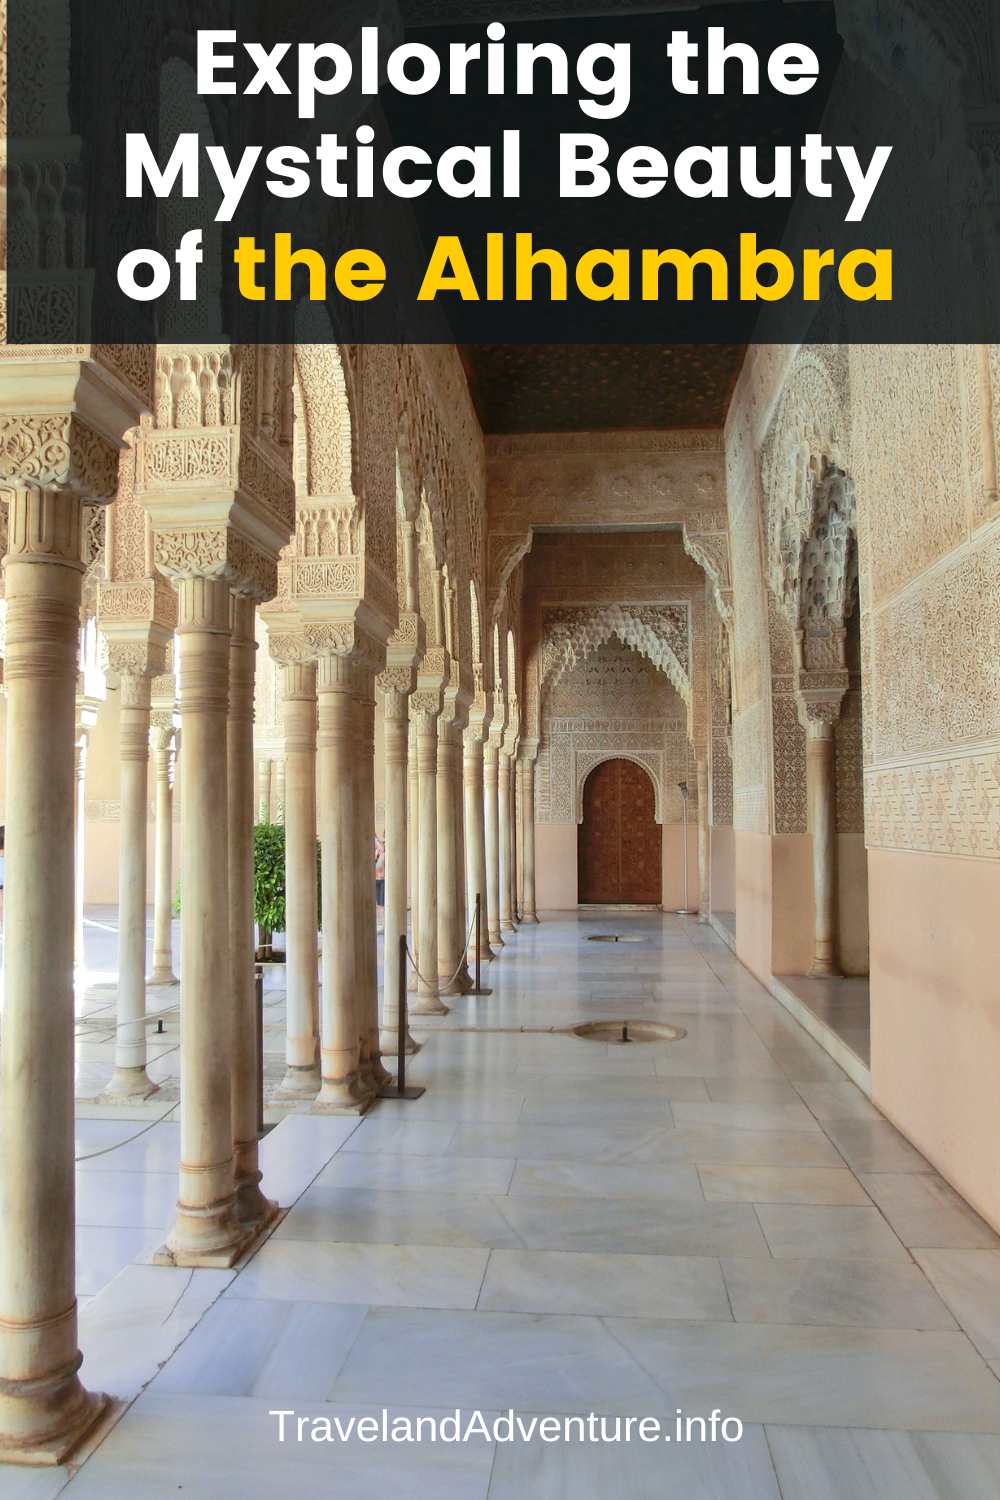 Exploring the Mystical Beauty of the Alhambra A Journey Through Spain's Moorish History